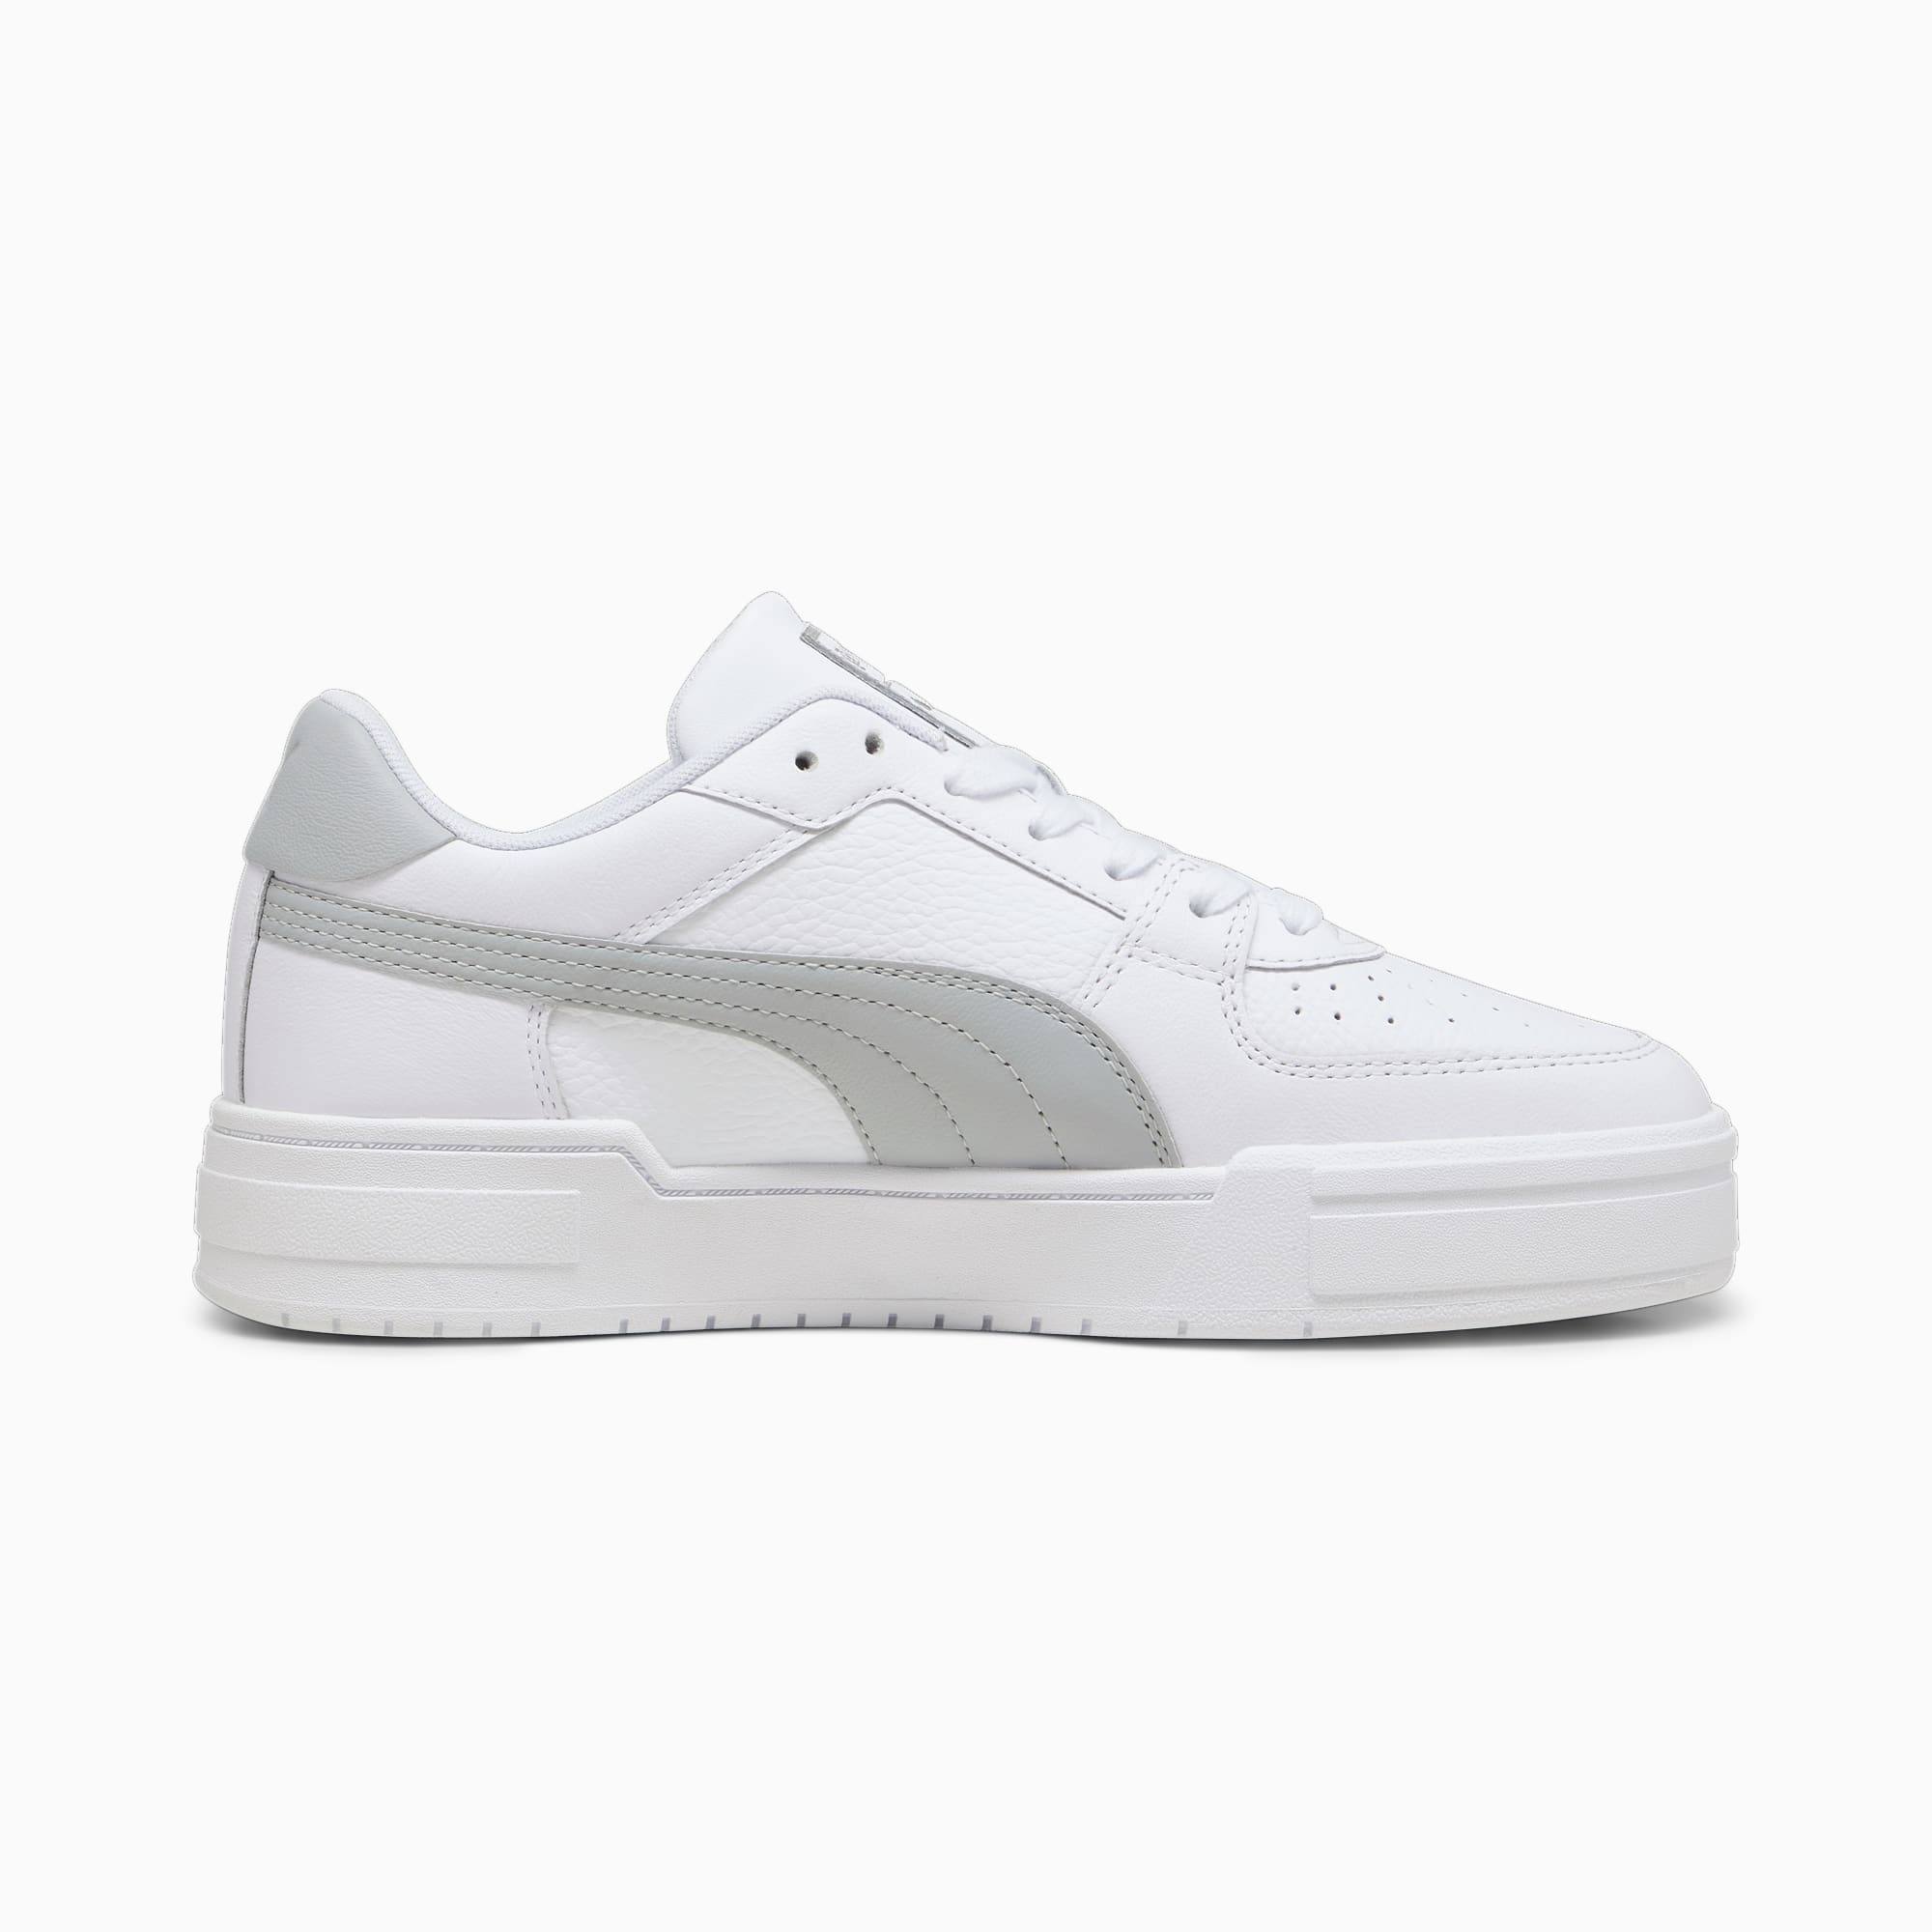 Women's PUMA Ca Pro Classic Trainers, White/Cool Light Grey, Size 38, Shoes